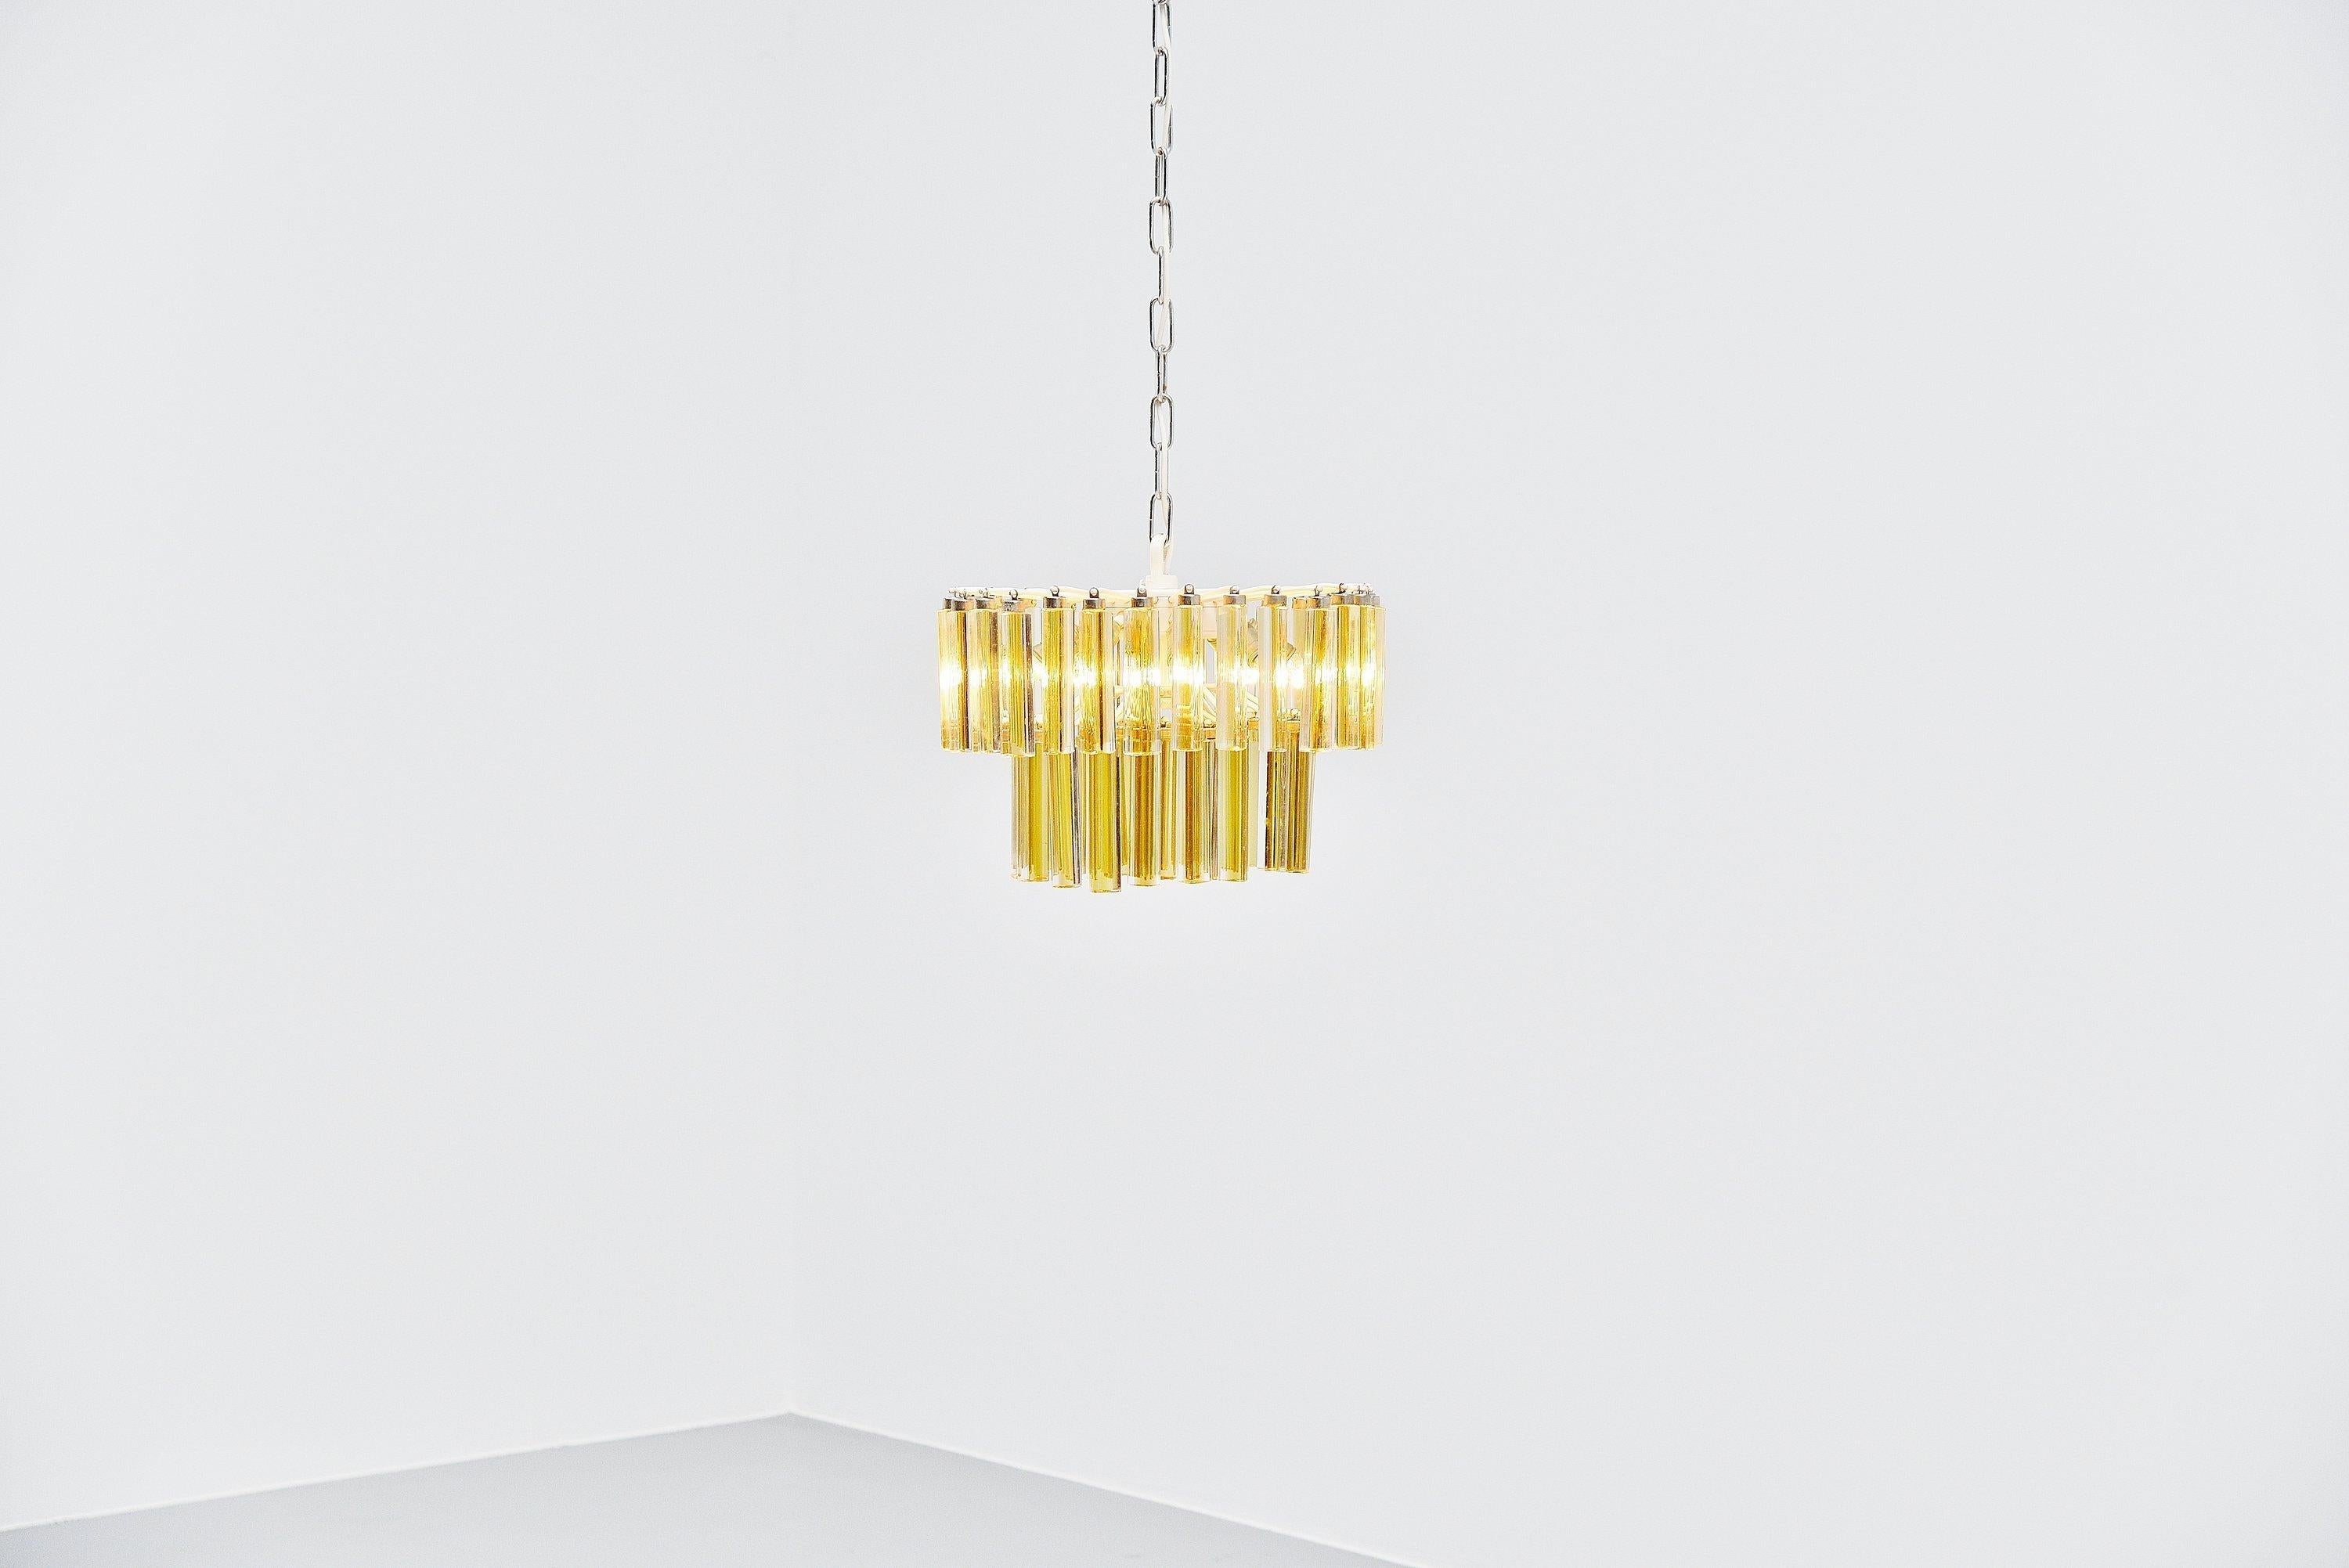 Decorative chandelier designed by Paolo Venini and manufactured by Venini, Italy 1960. The lamp has a metal white painted frame which holds 55 crystal glass pegs in clear and yellow glass, the lamp gives very nice warm light when lit. Lamp uses E14